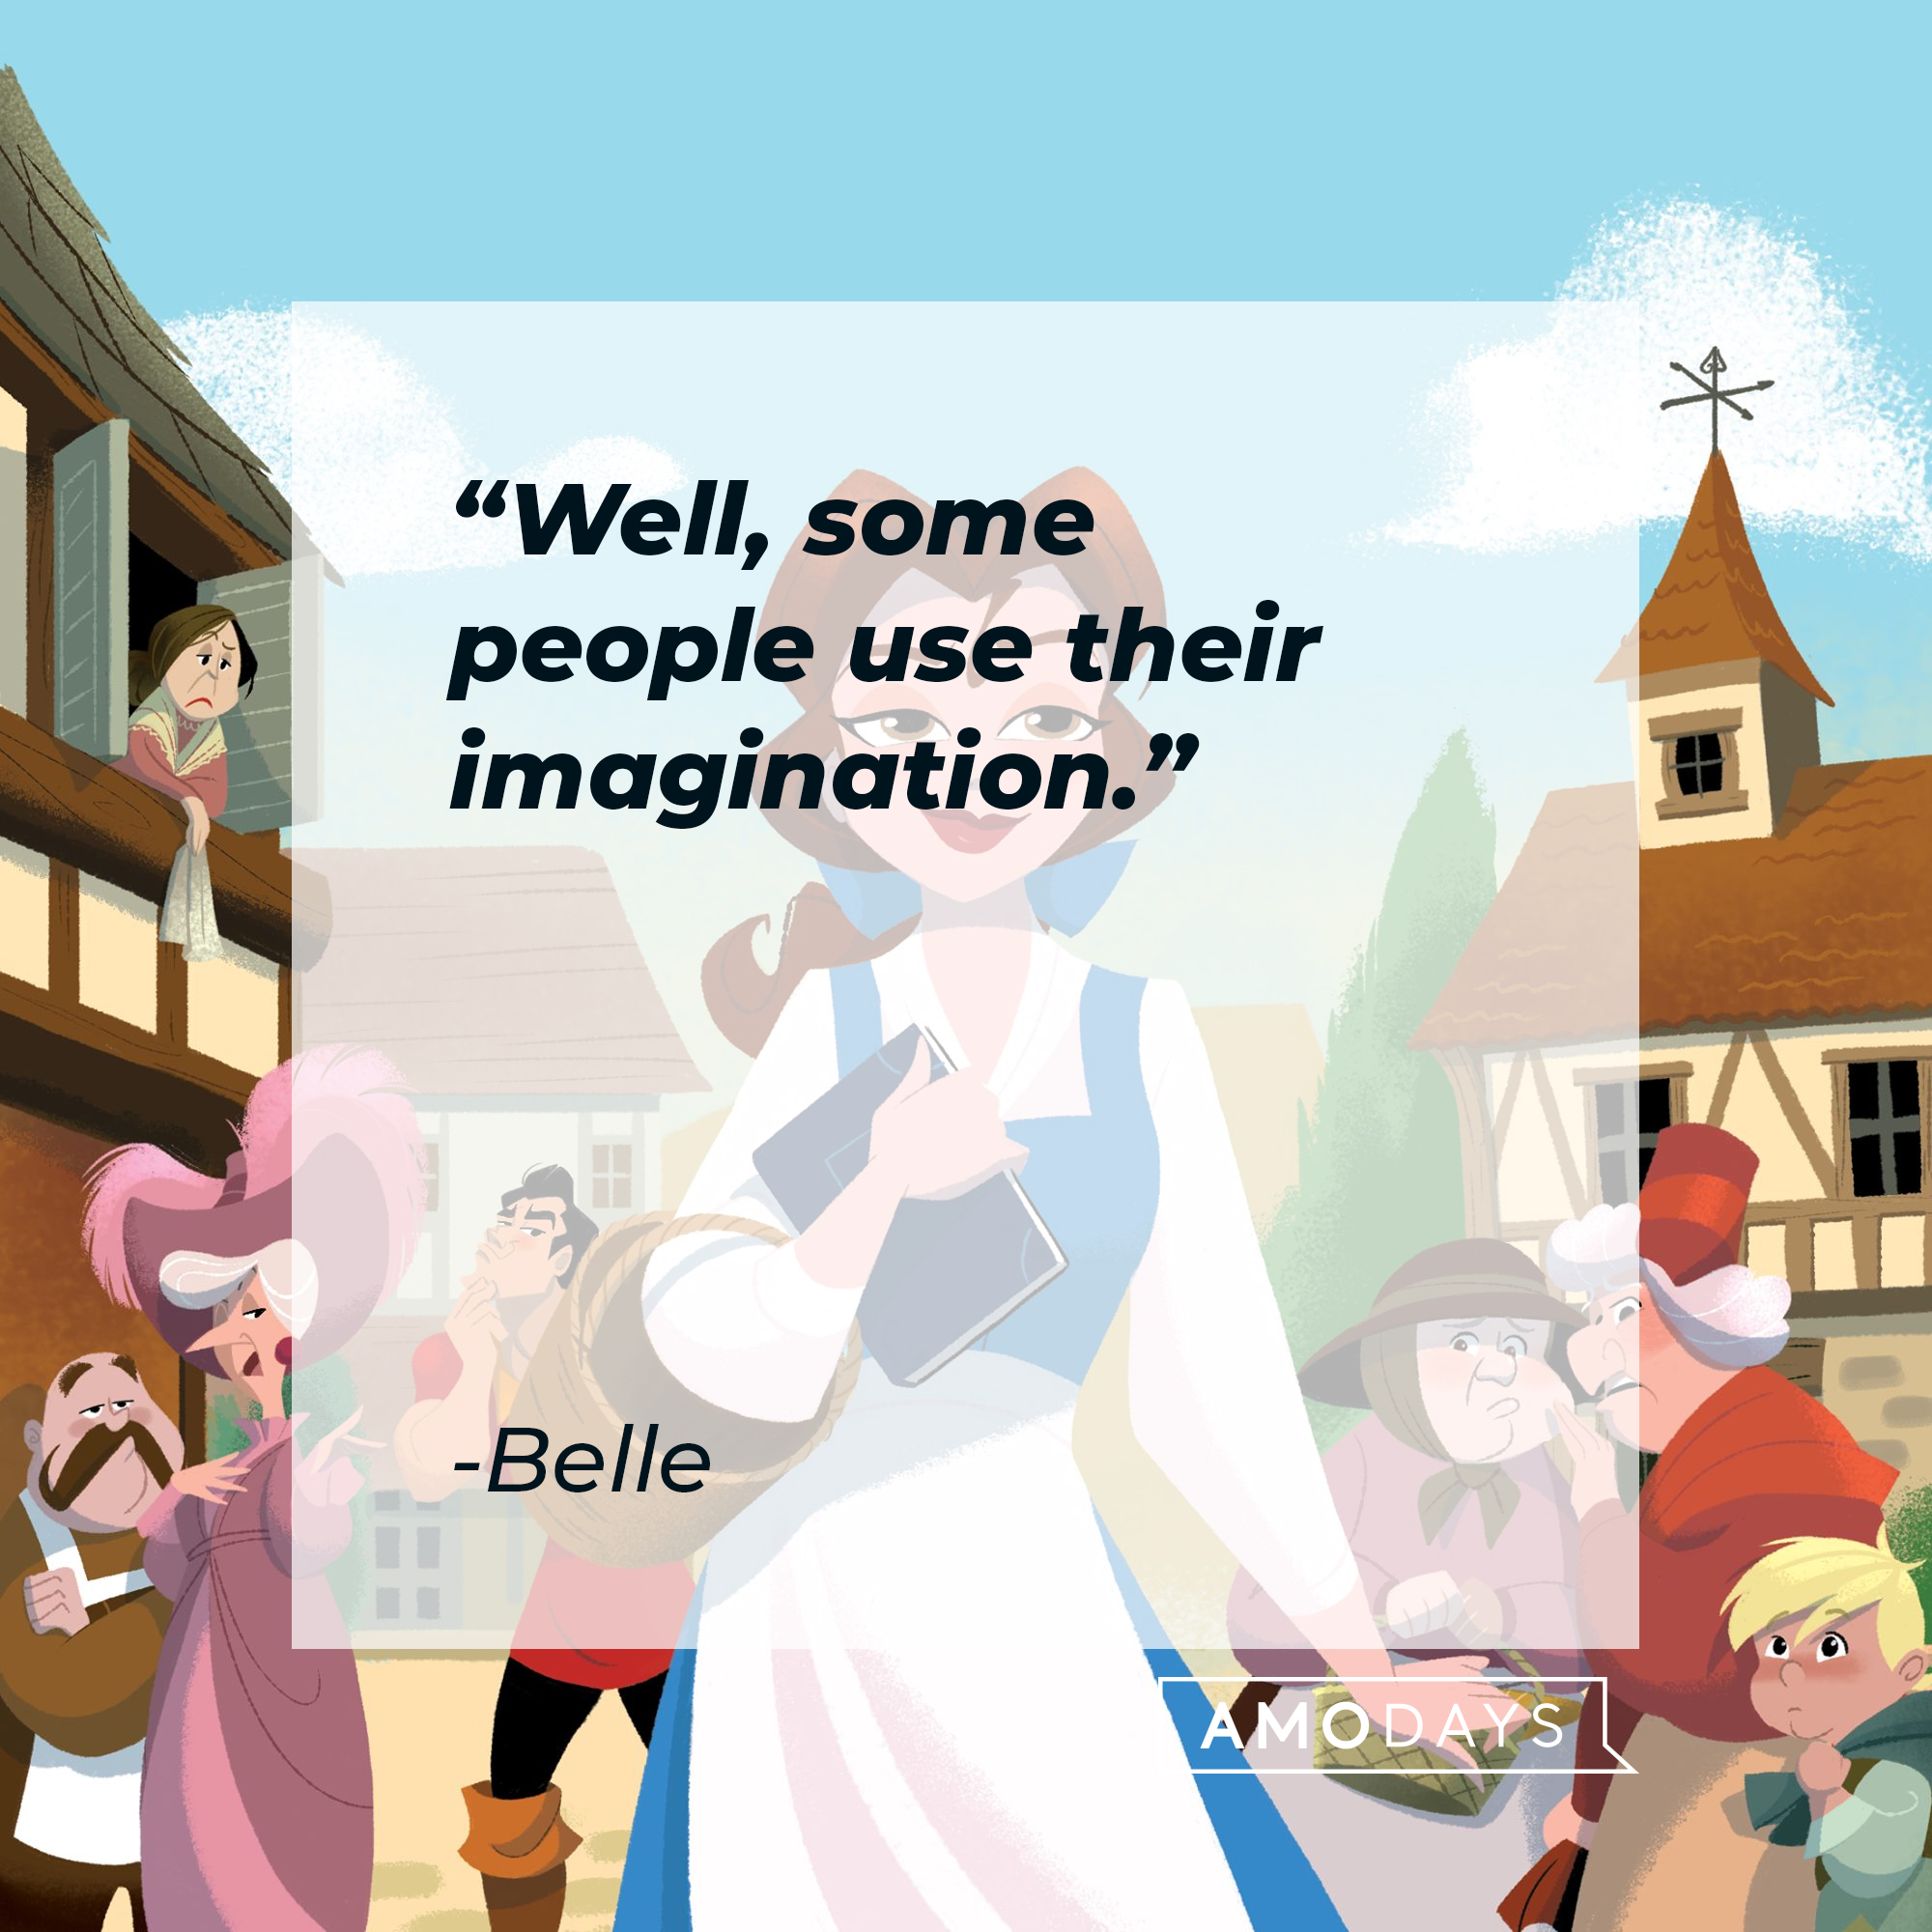 Belle's quote: "Well, some people use their imagination." | Source: Facebook.com/DisneyBeautyAndTheBeast